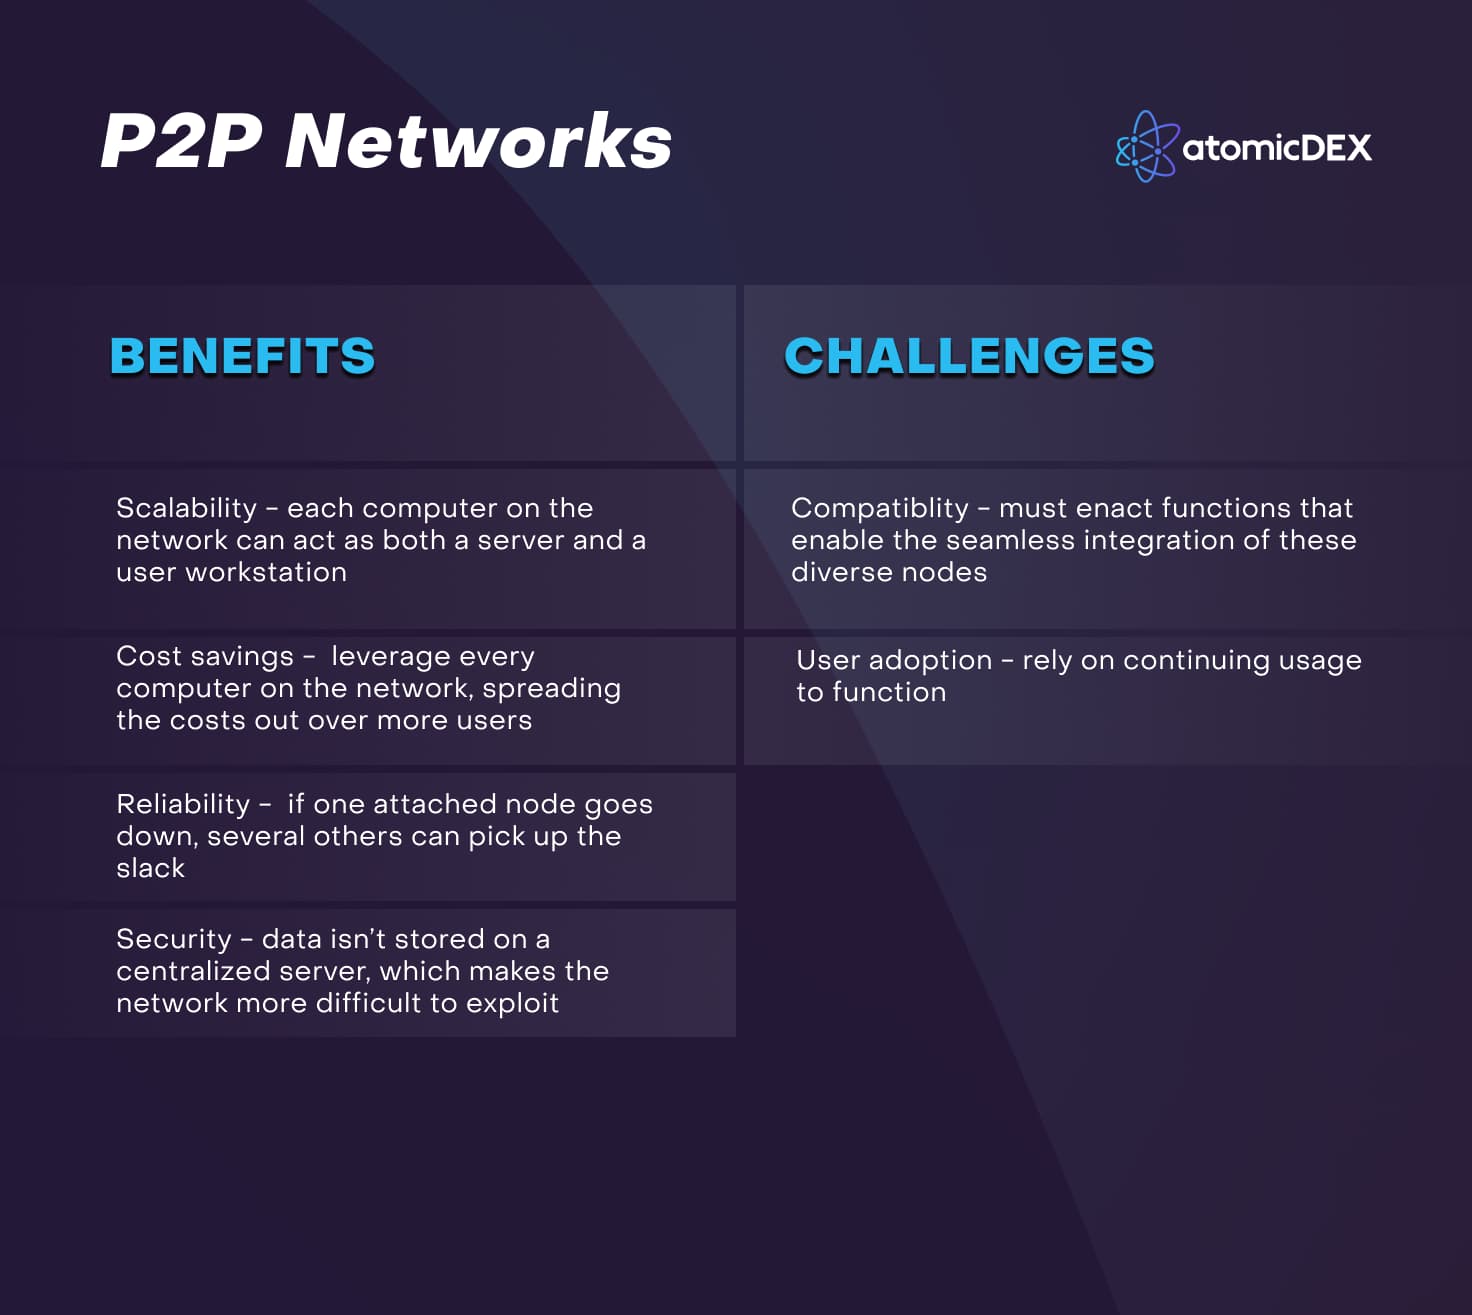 P2P Networks - Benefits and Challenges